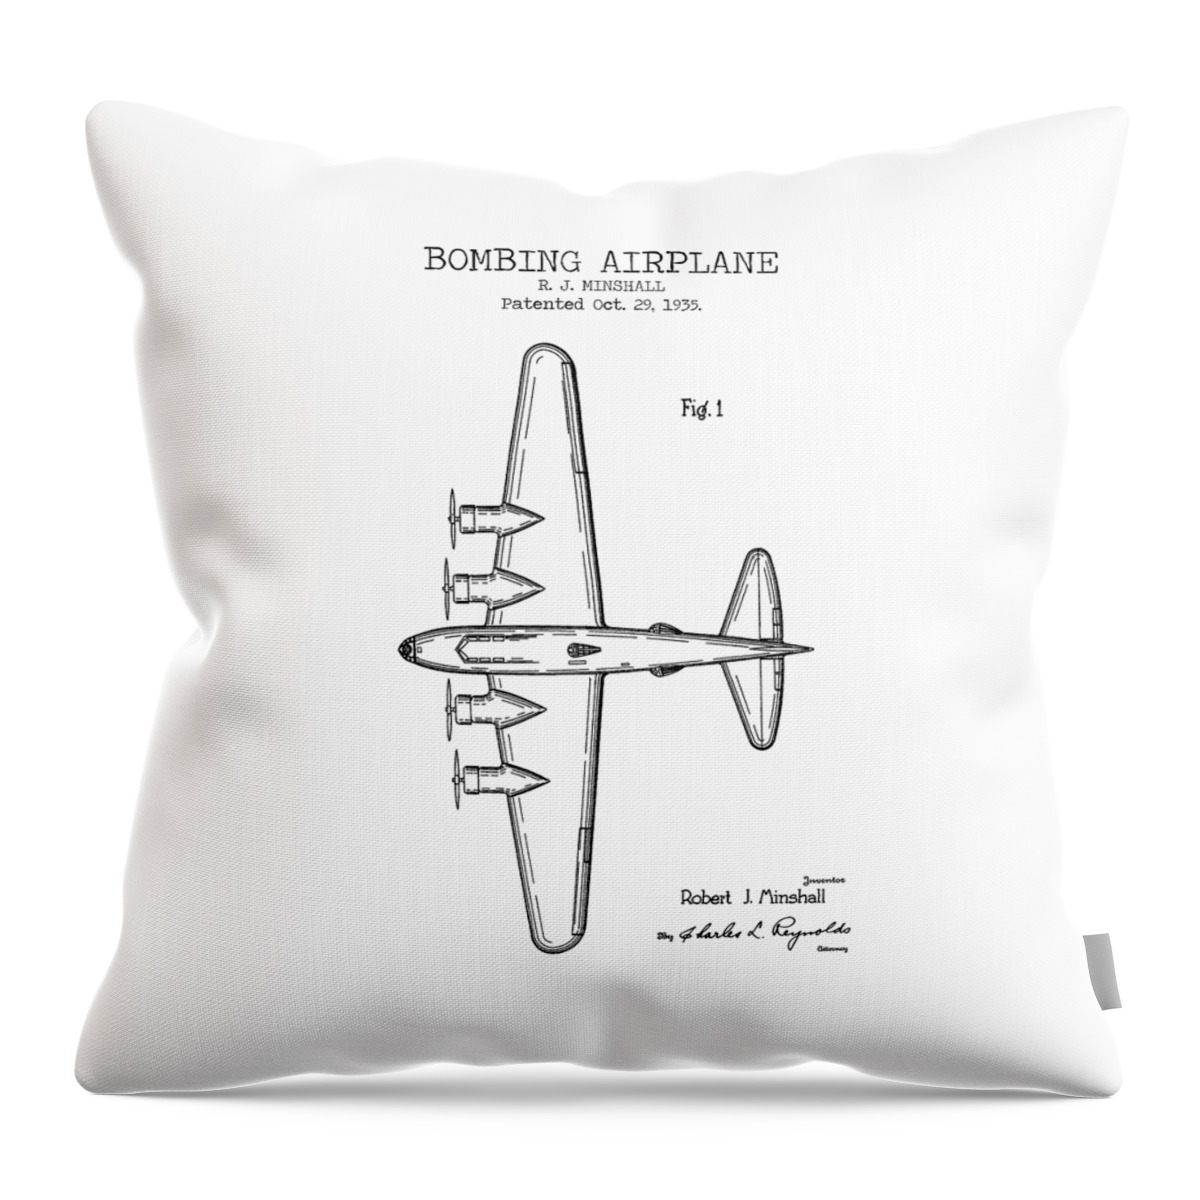 Bombing Airplane Patent Throw Pillow featuring the digital art BOMBING AIRPLANE patent by Dennson Creative